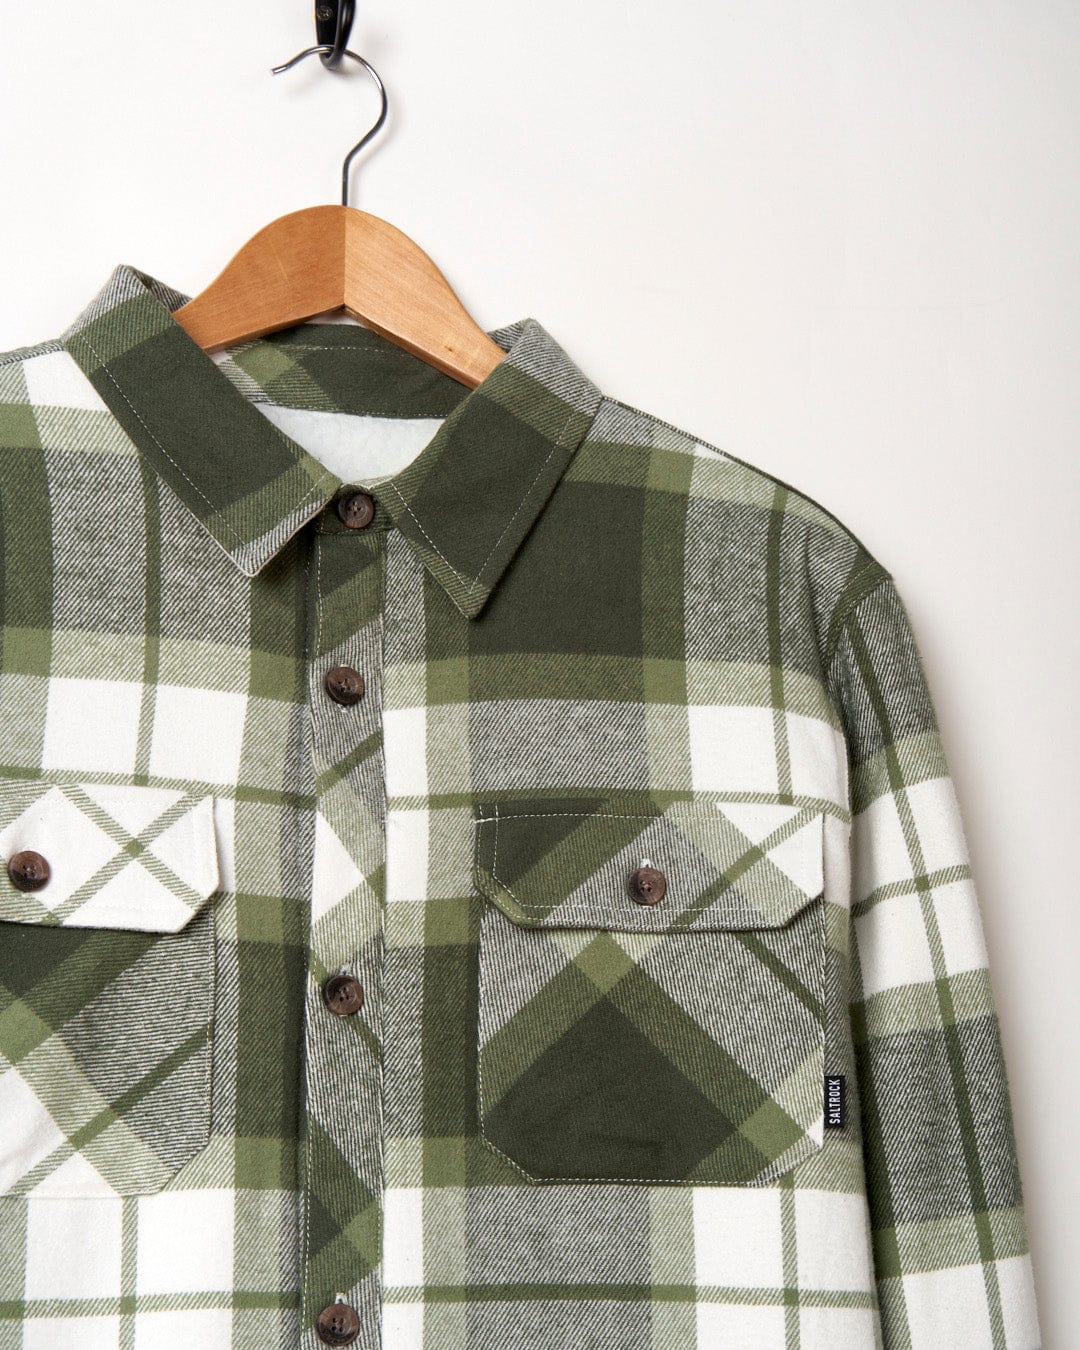 A Woody - Mens Borg Lined Shacket - Green Check shirt by Saltrock, hanging on a hanger.